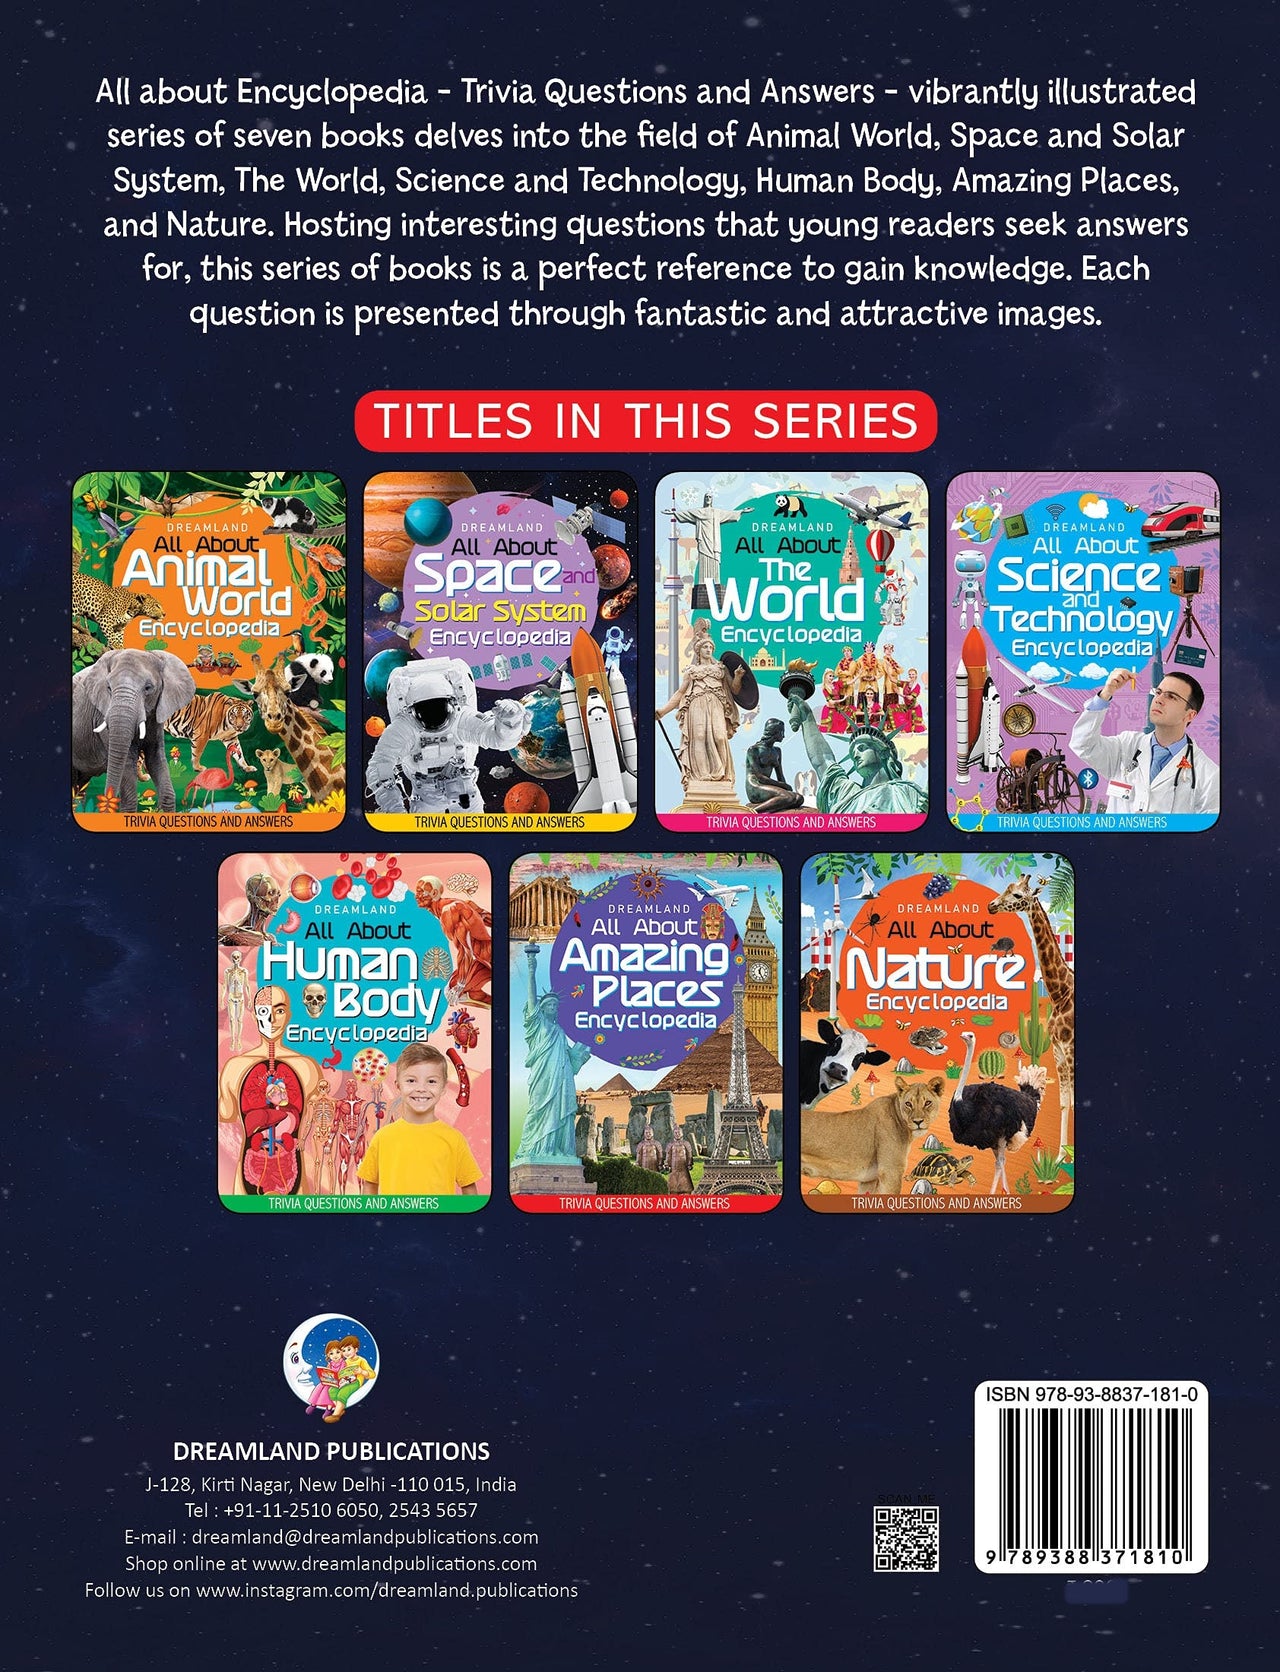 Dreamland Space and Solar System Encyclopedia for Children Age 5 - 15 Years- All About Trivia Questions and Answers - Distacart